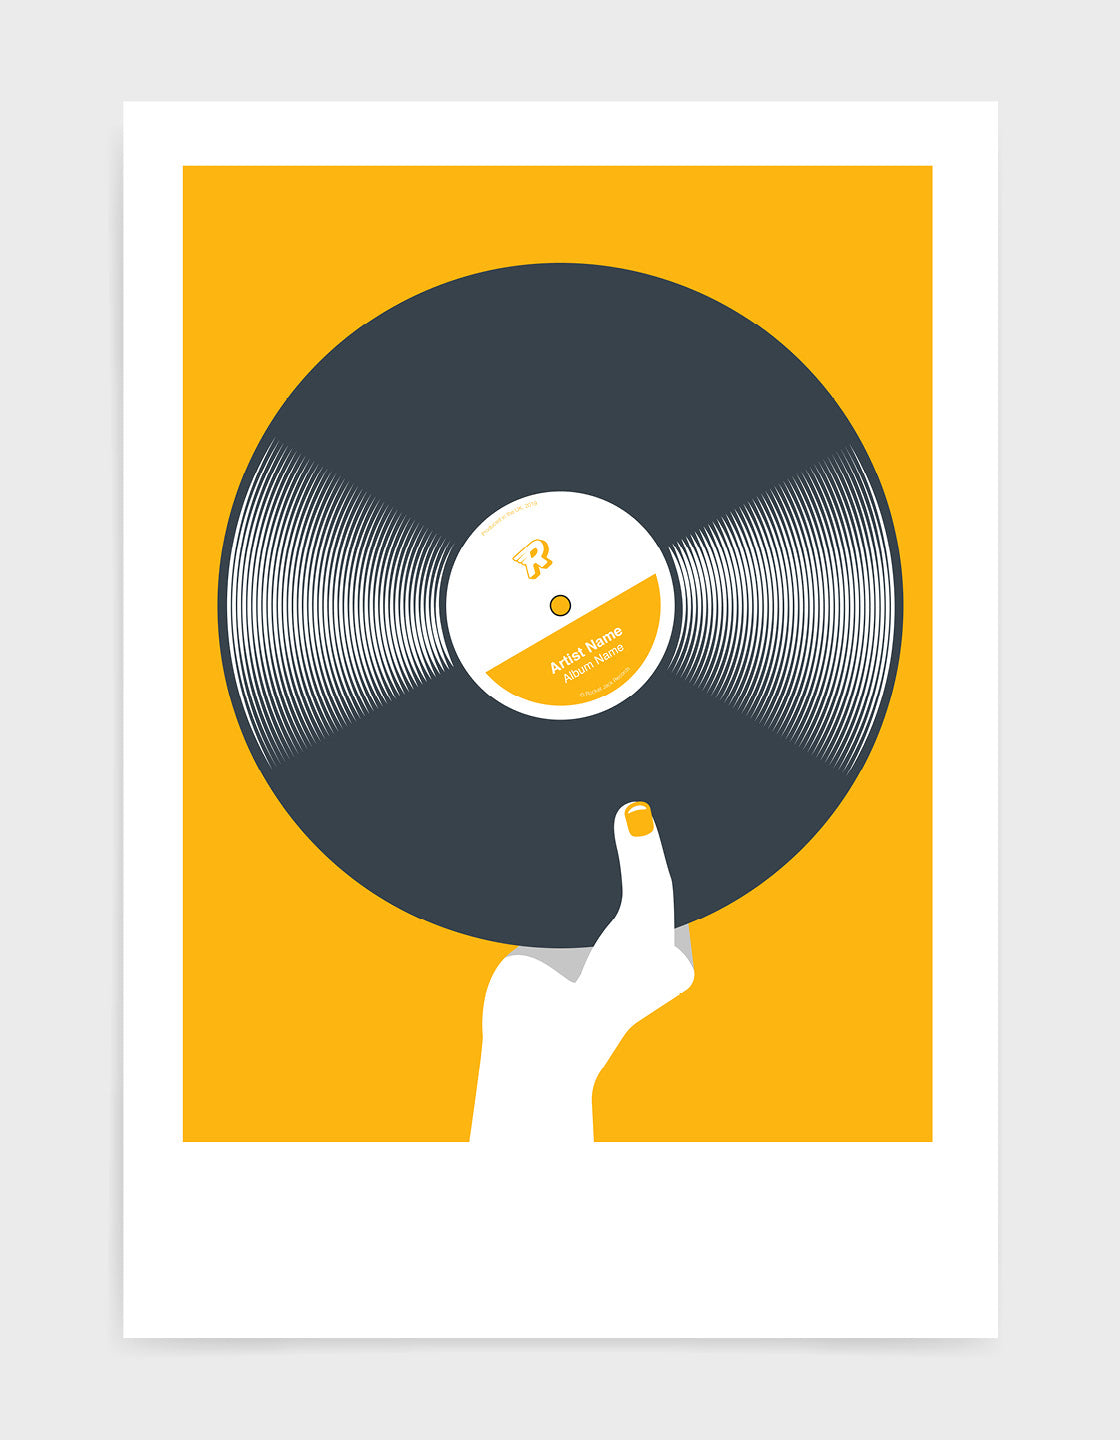  art print image of a Personalised black vinyl record held in a hand with red nails against a yellow background